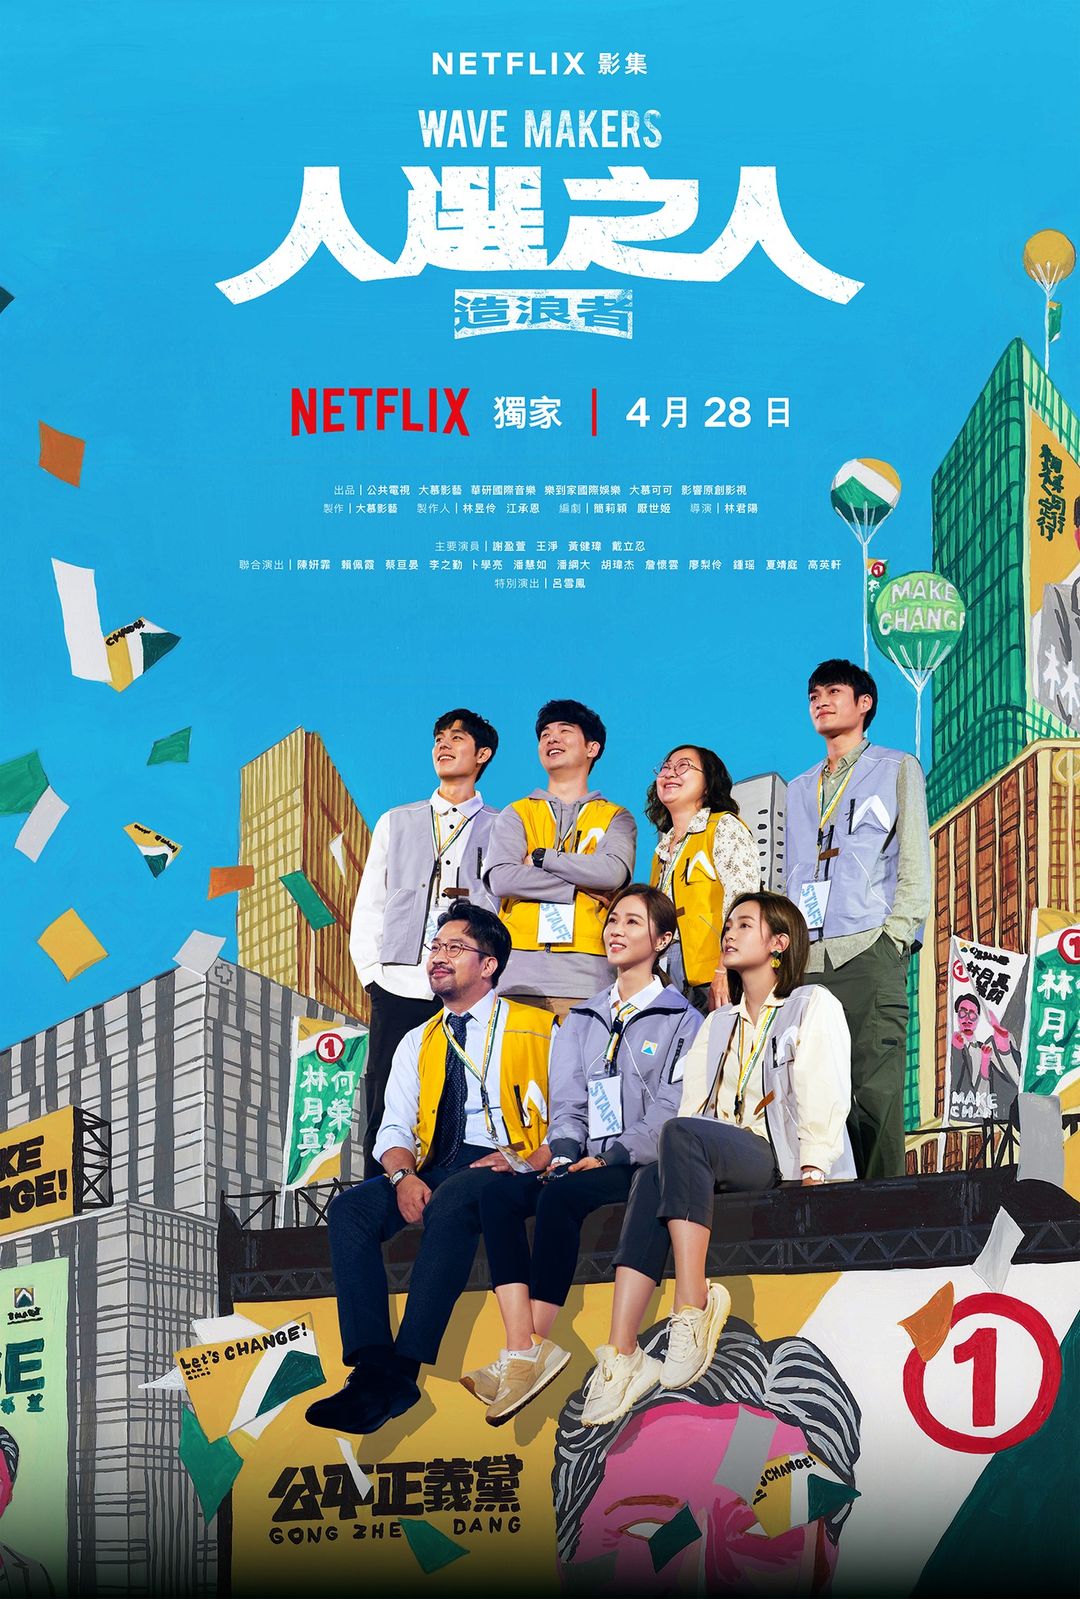 TV ratings for Wave Makers (人選之人－造浪者) in Portugal. Netflix TV series